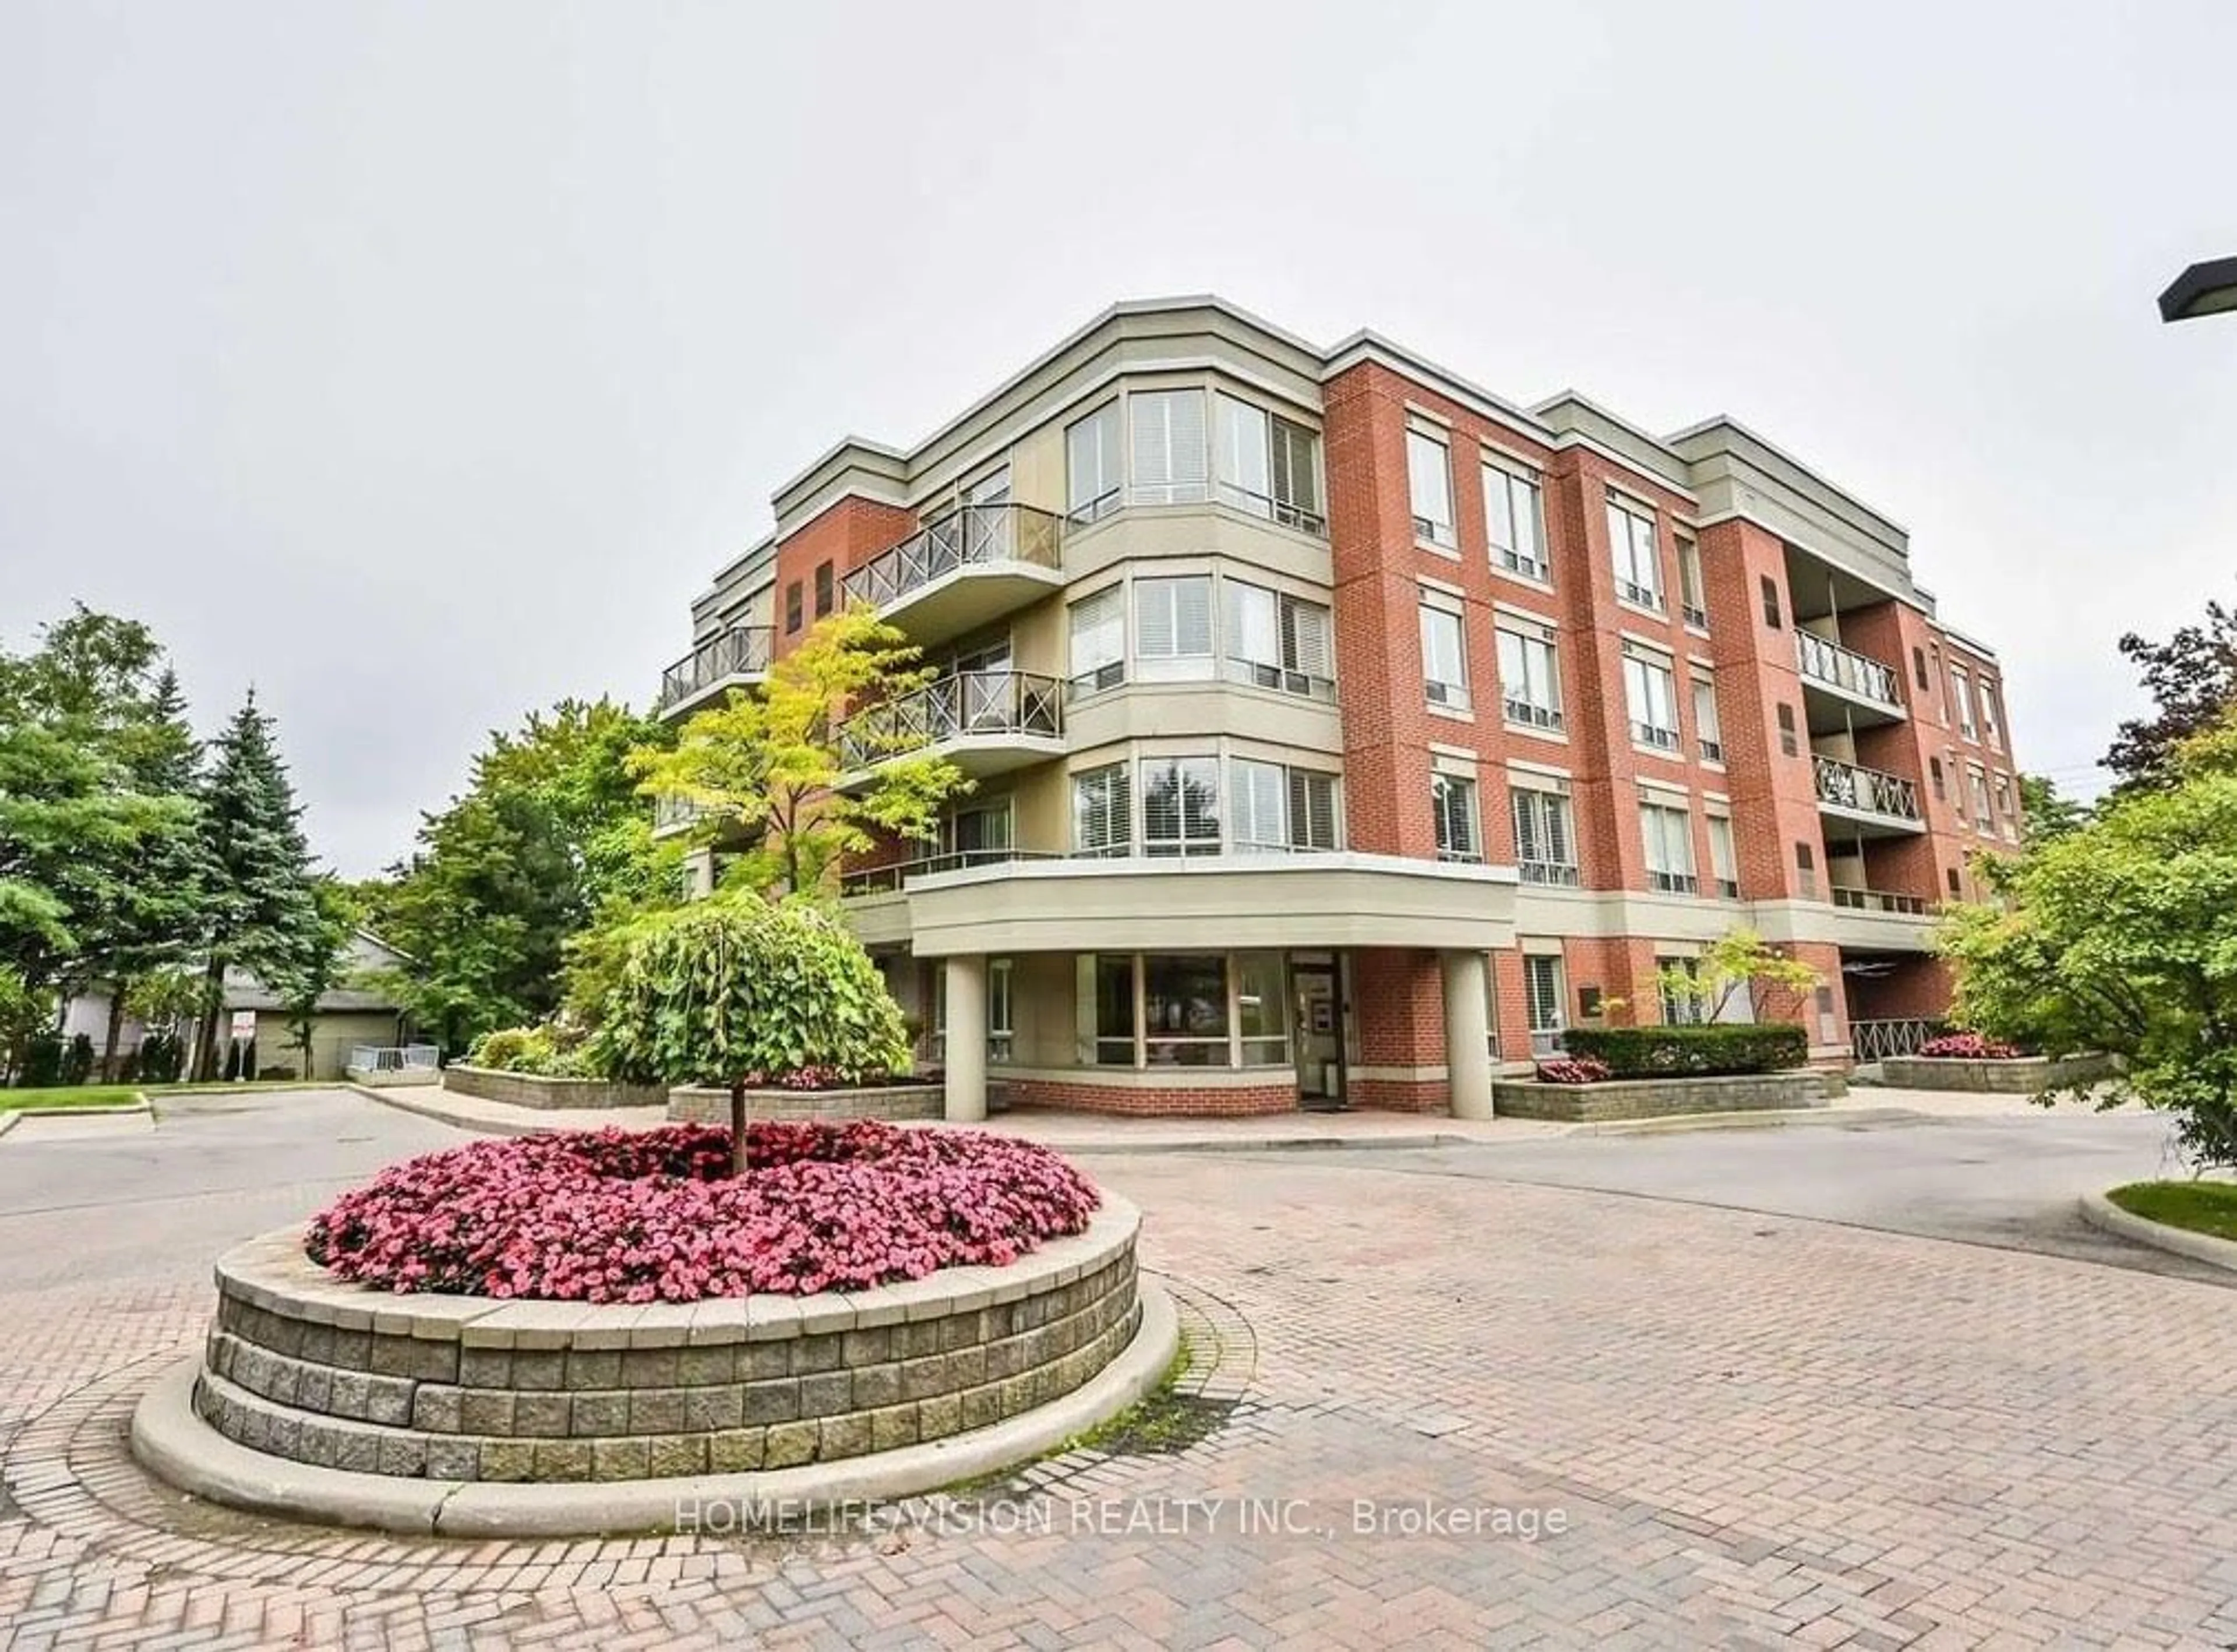 A pic from exterior of the house or condo for 801 Lawrence Ave #305, Toronto Ontario M3C 3W2